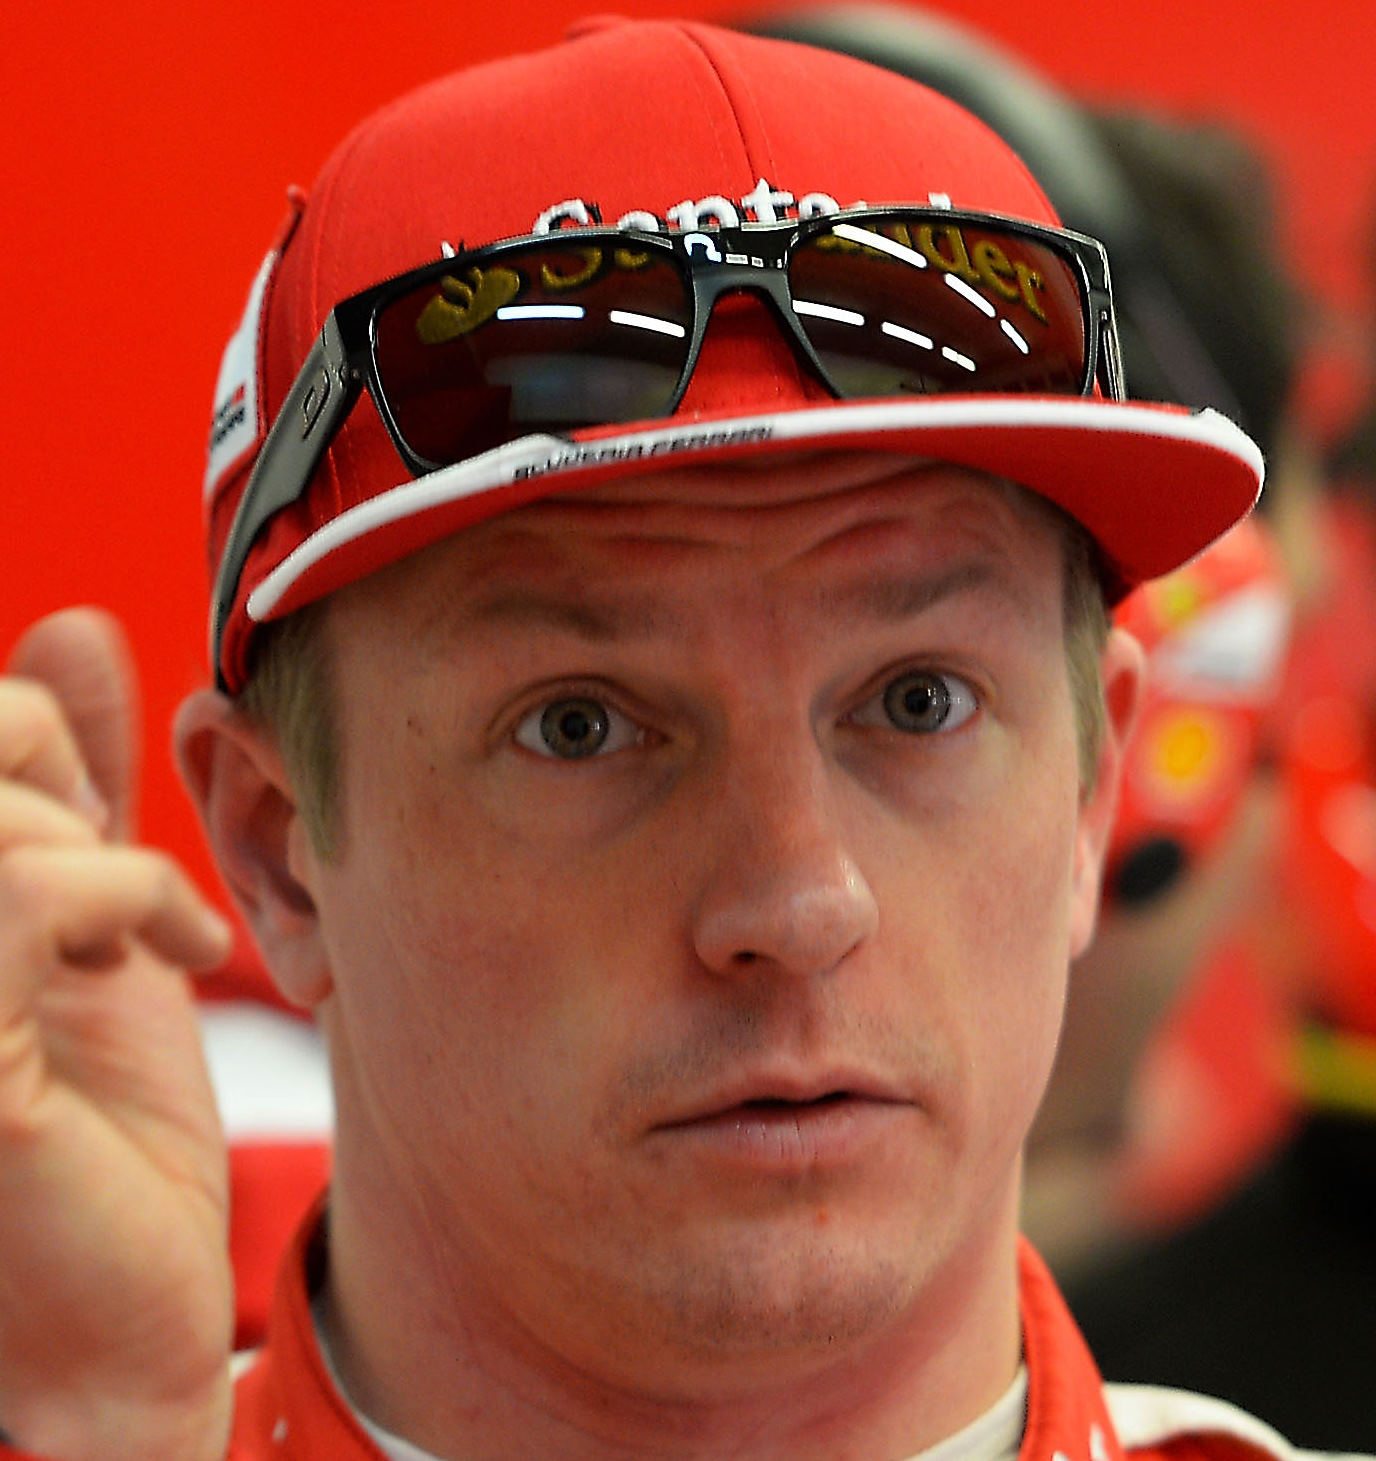 Kimi Raikkonen has another career once Ferrari puts him out to pasture